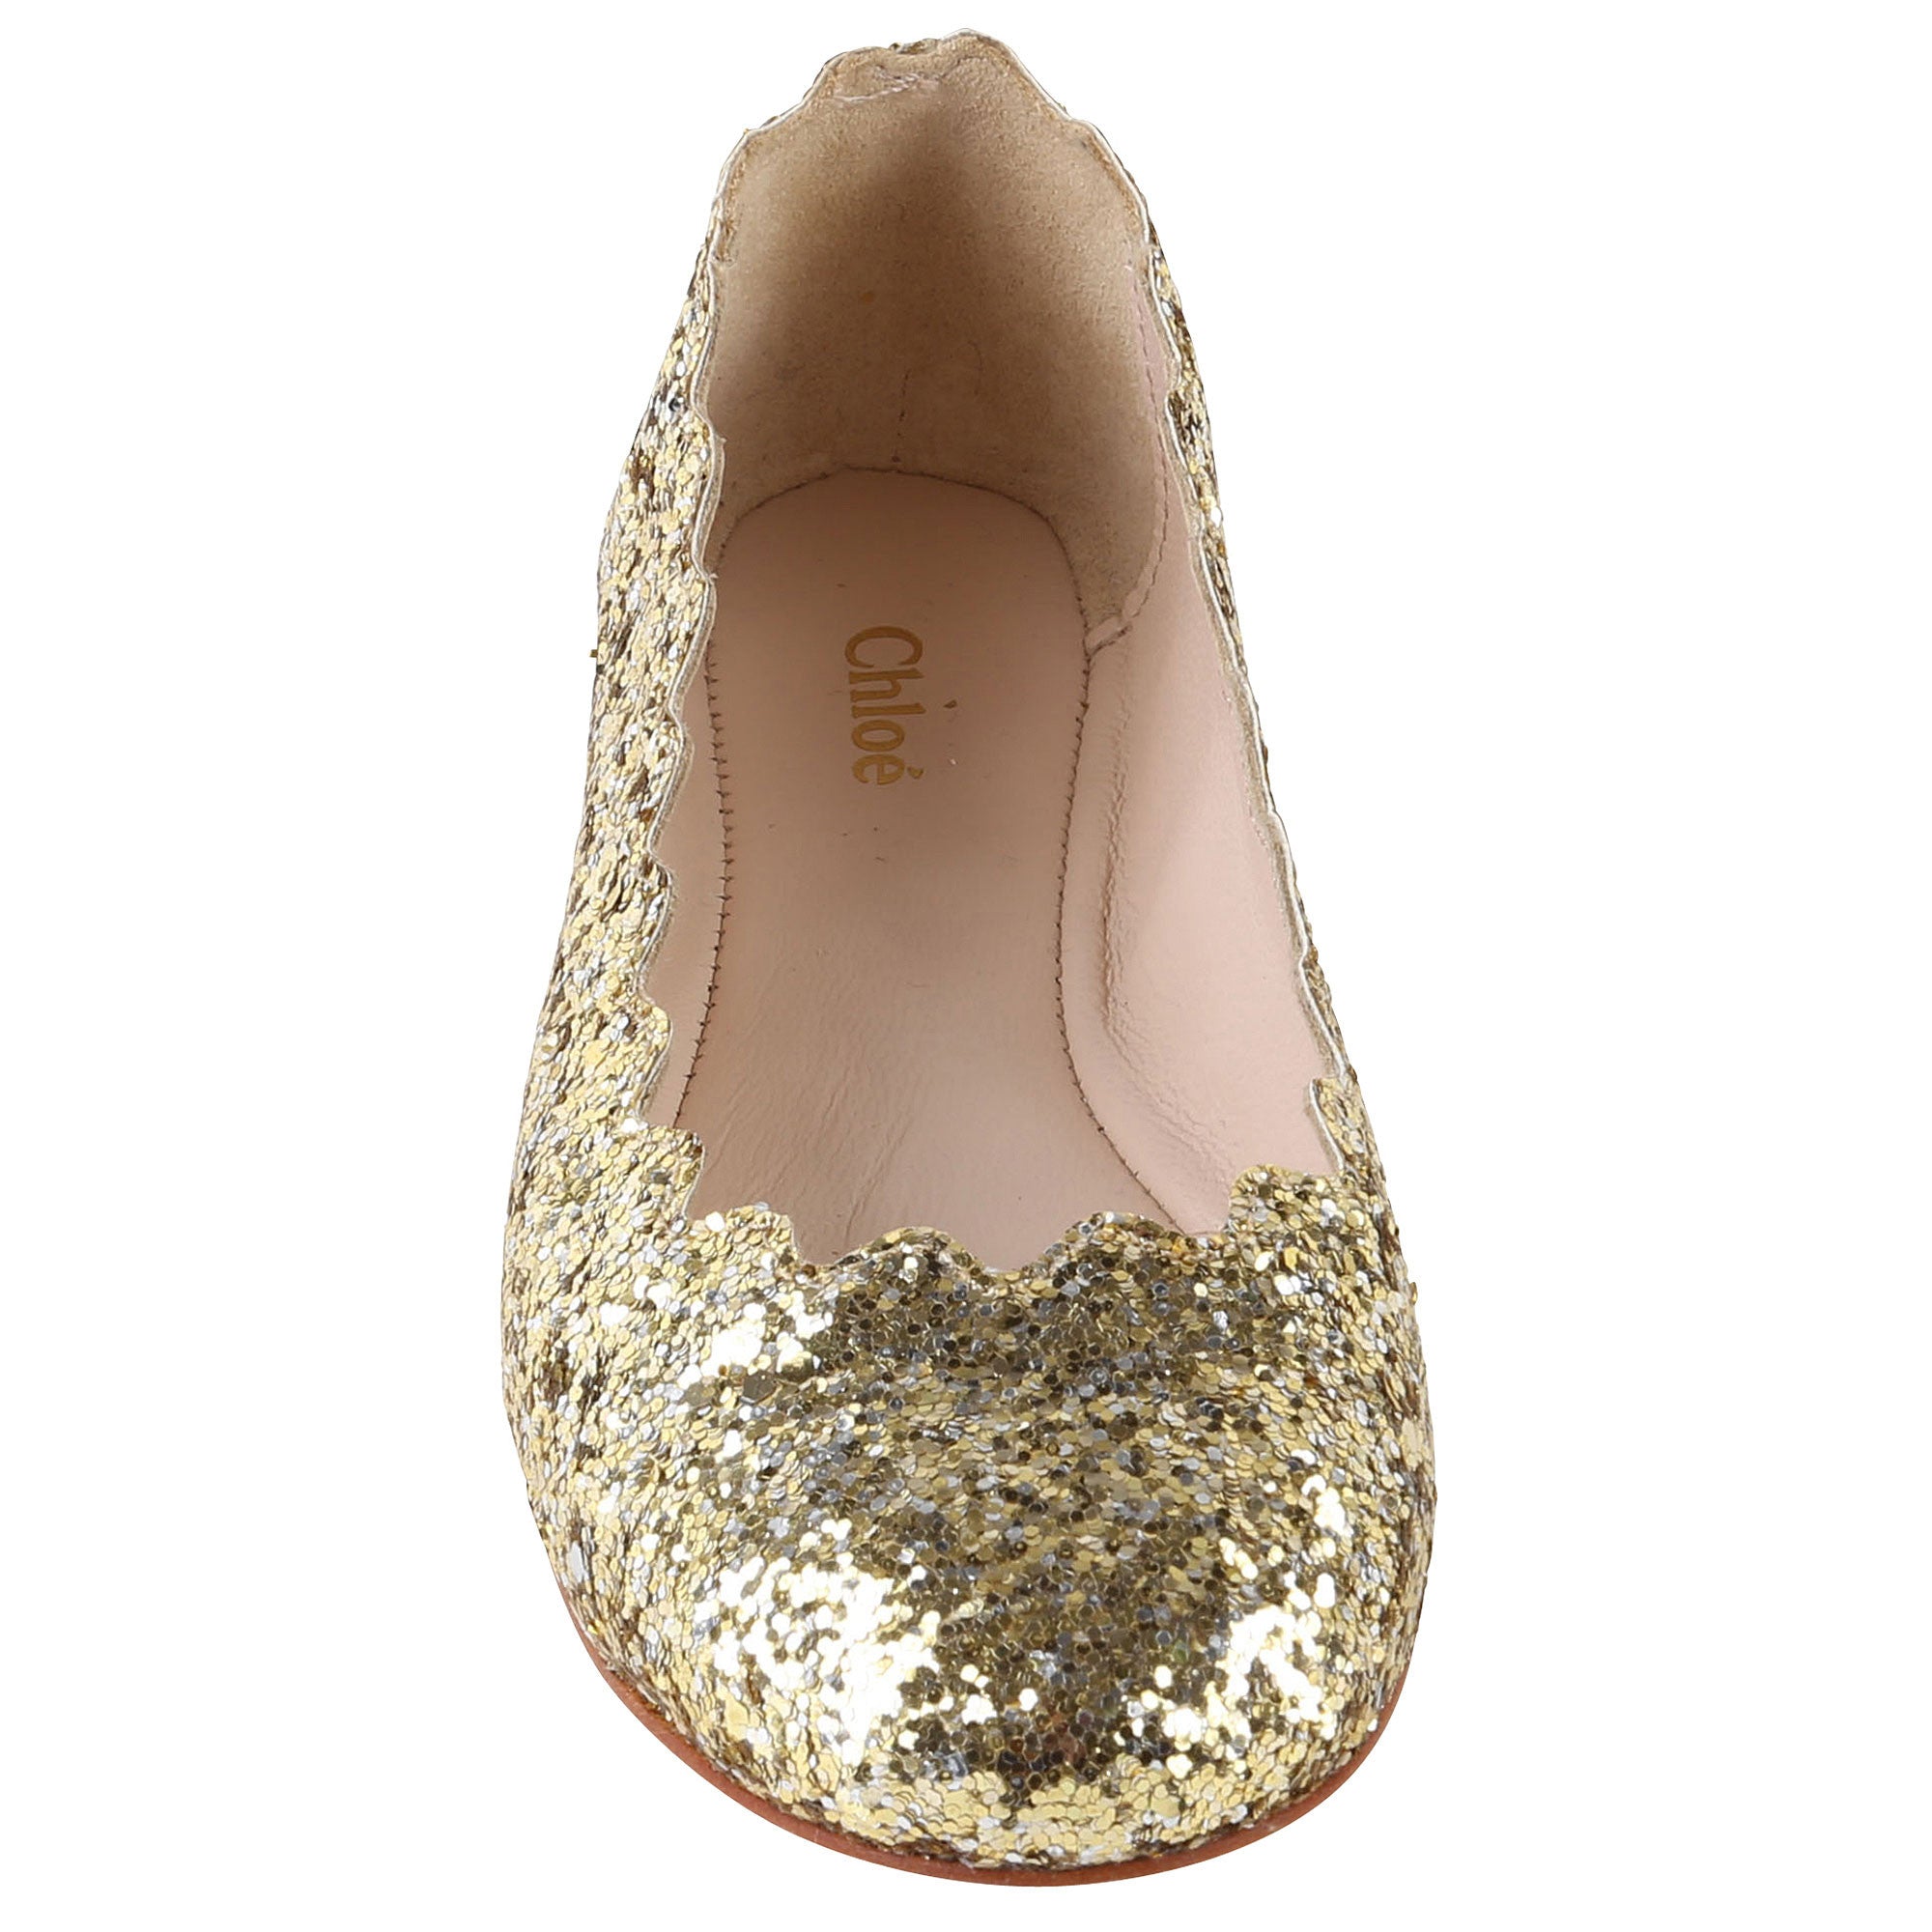 Girls Gold Scalloped Leather Shoes - CÉMAROSE | Children's Fashion Store - 2